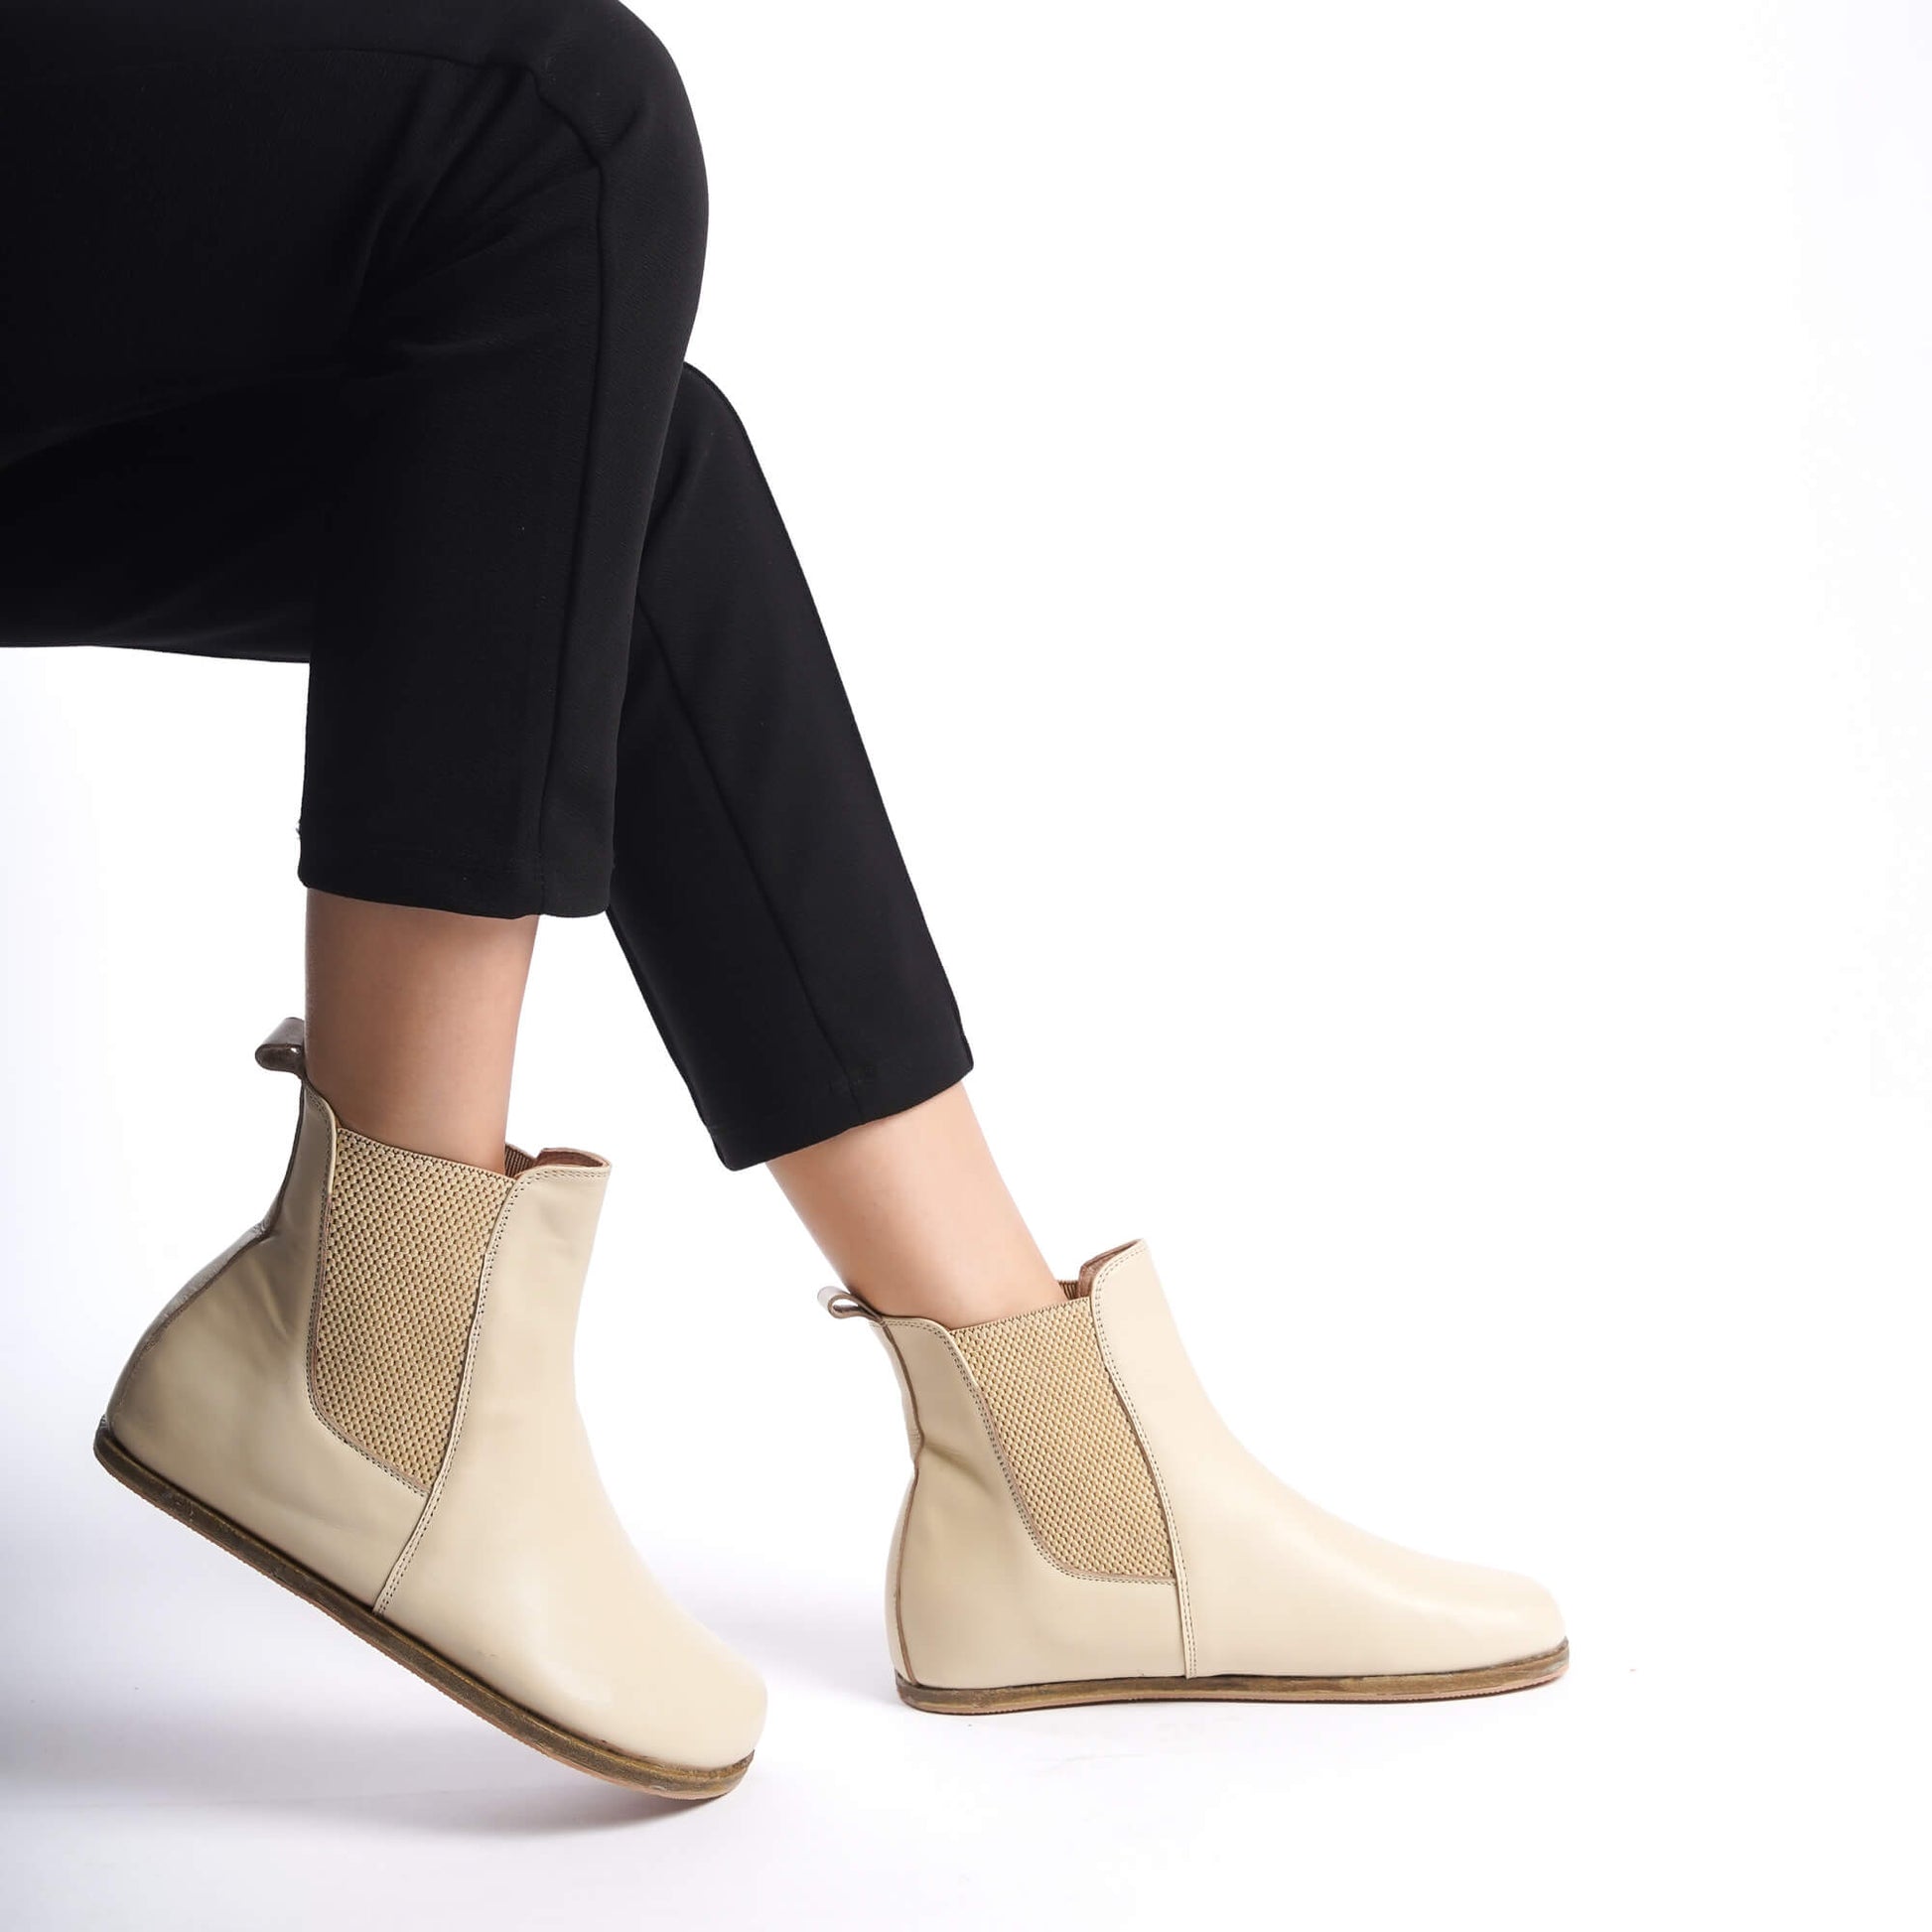 Elegant cream Chelsea boots featuring a wide toe box and crafted from genuine natural leather. Ideal for stylish and comfortable wear.